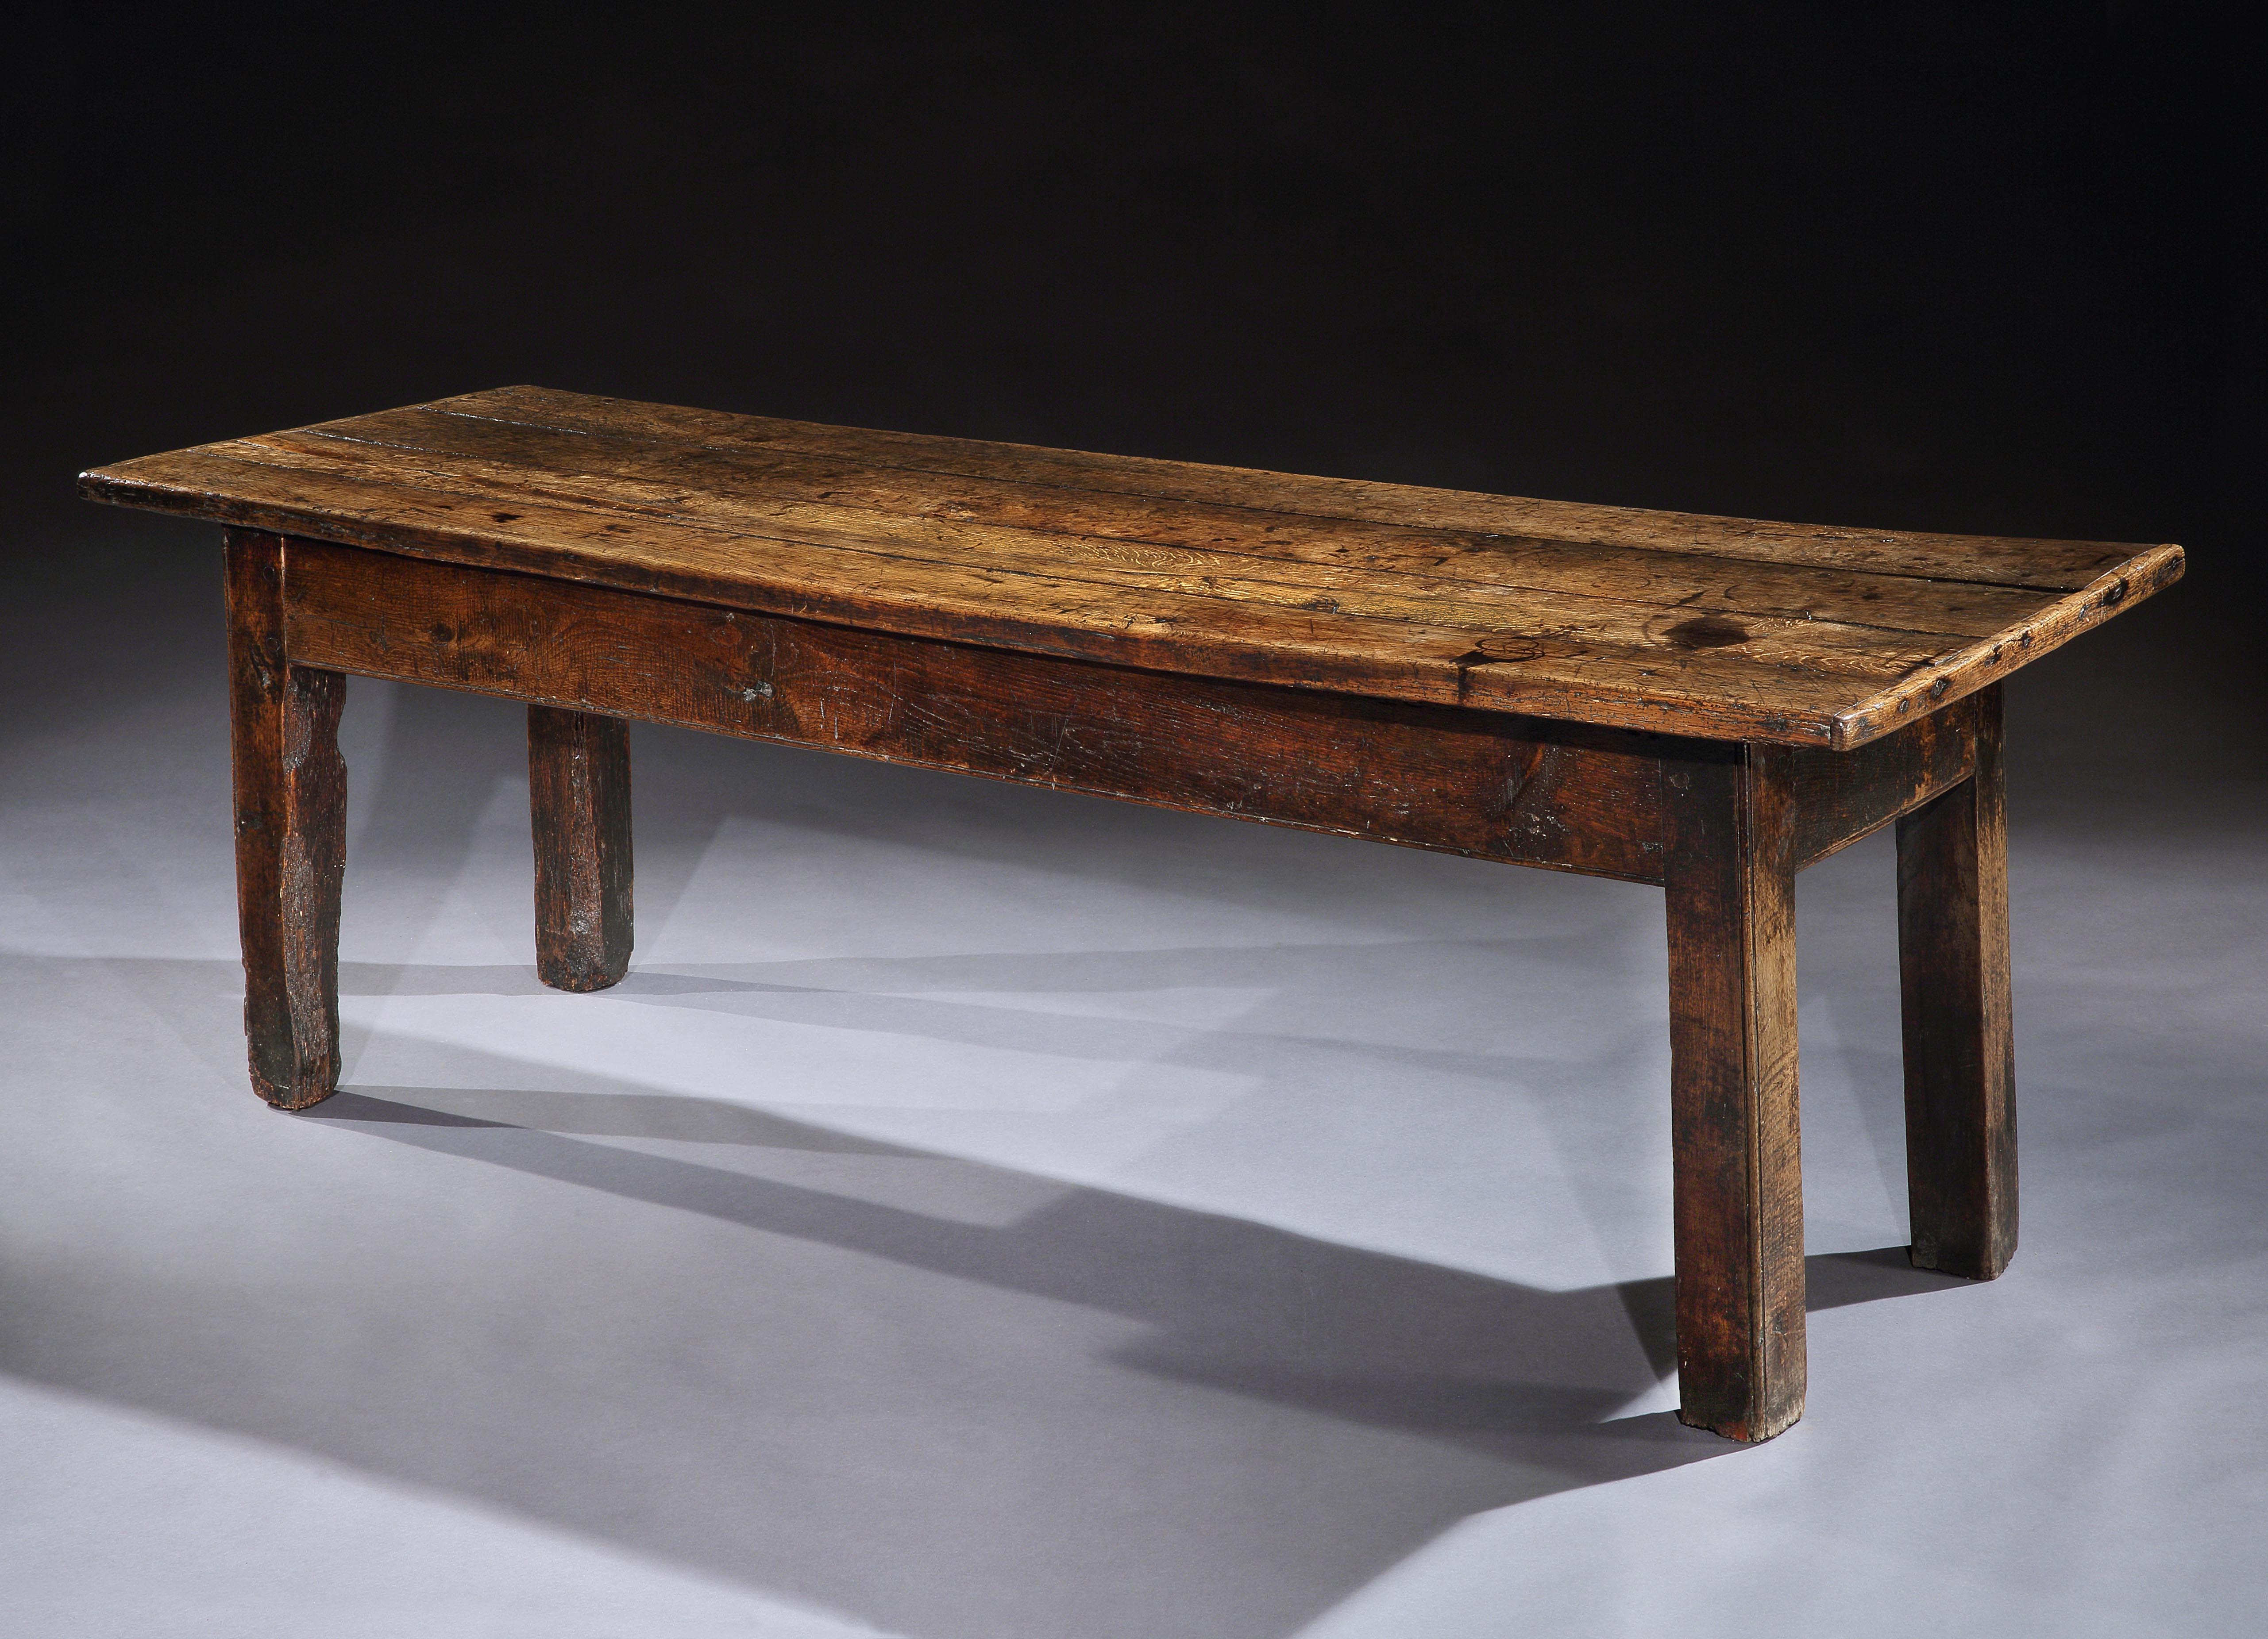 This farmhouse table exudes character which is an essential feature of vernacular furniture and is the best example of its type that I have seen. The thick, oak top is tactile and sculptural with beautiful figuring and an exceptional, lustrous